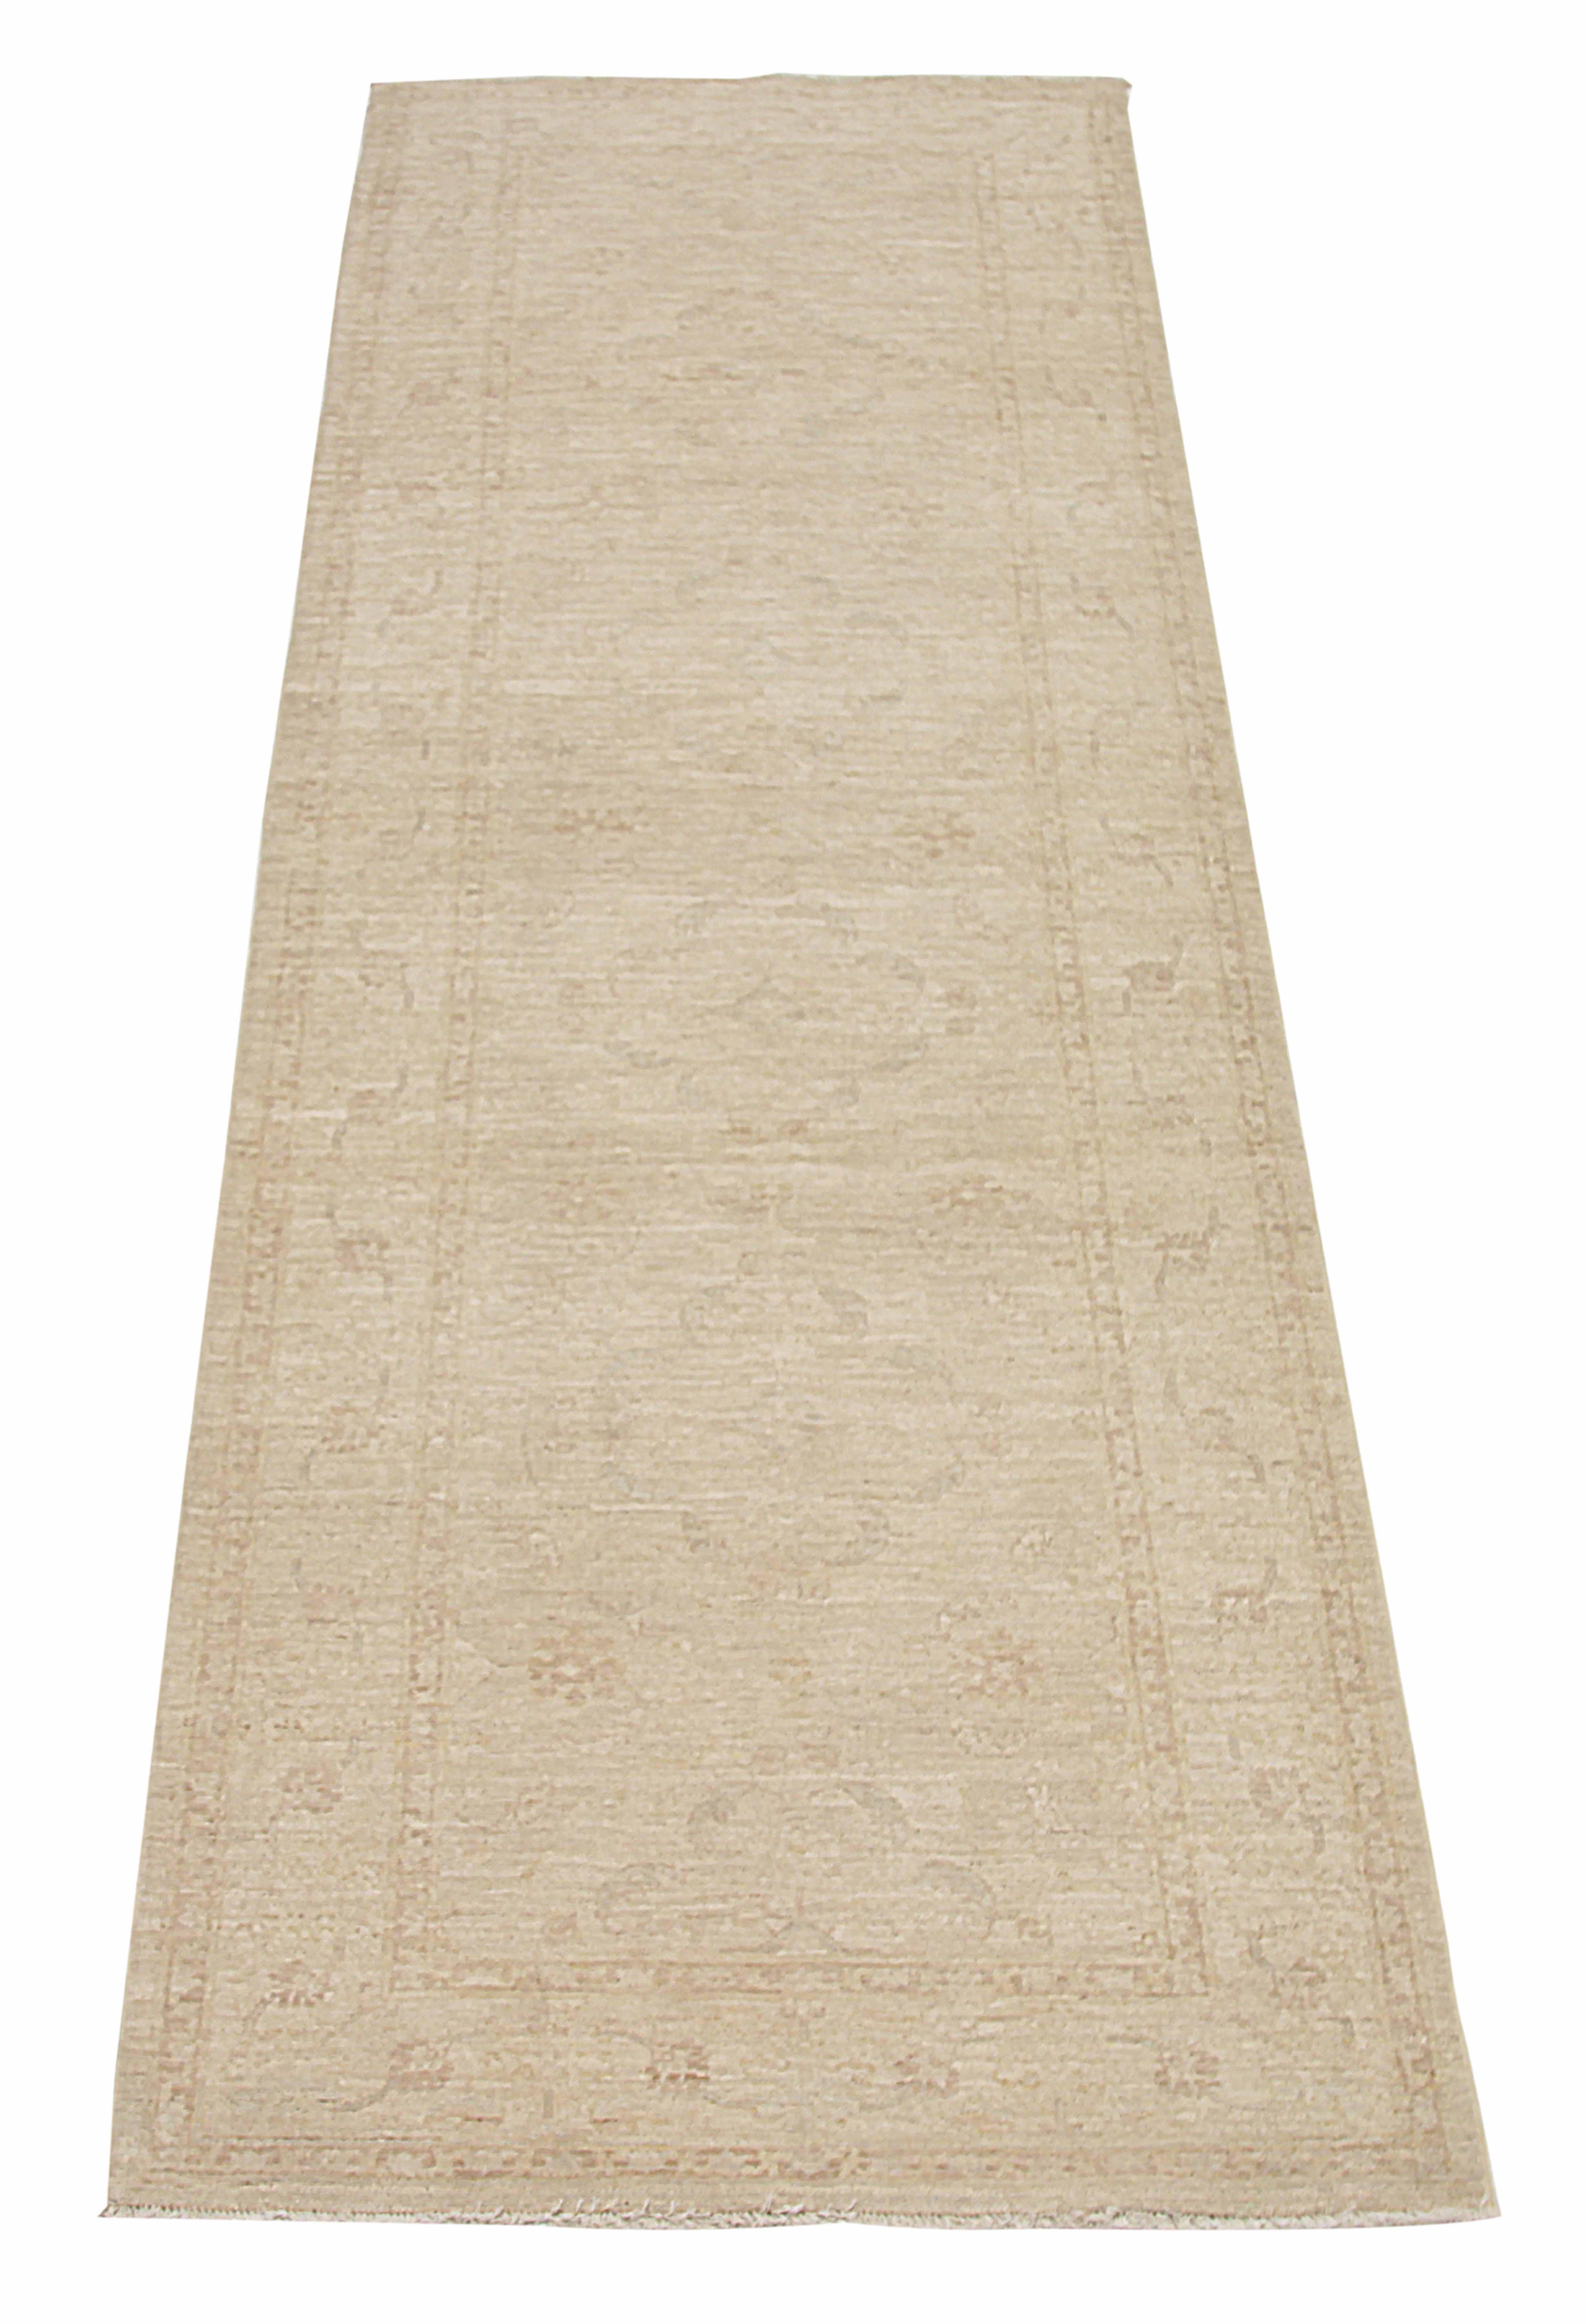 Modern Afghan runner rug handwoven from the finest sheep’s wool. It’s colored with all-natural vegetable dyes that are safe for humans and pets. It’s a traditional Tabriz design handwoven by expert artisans. It’s a lovely area rug that can be